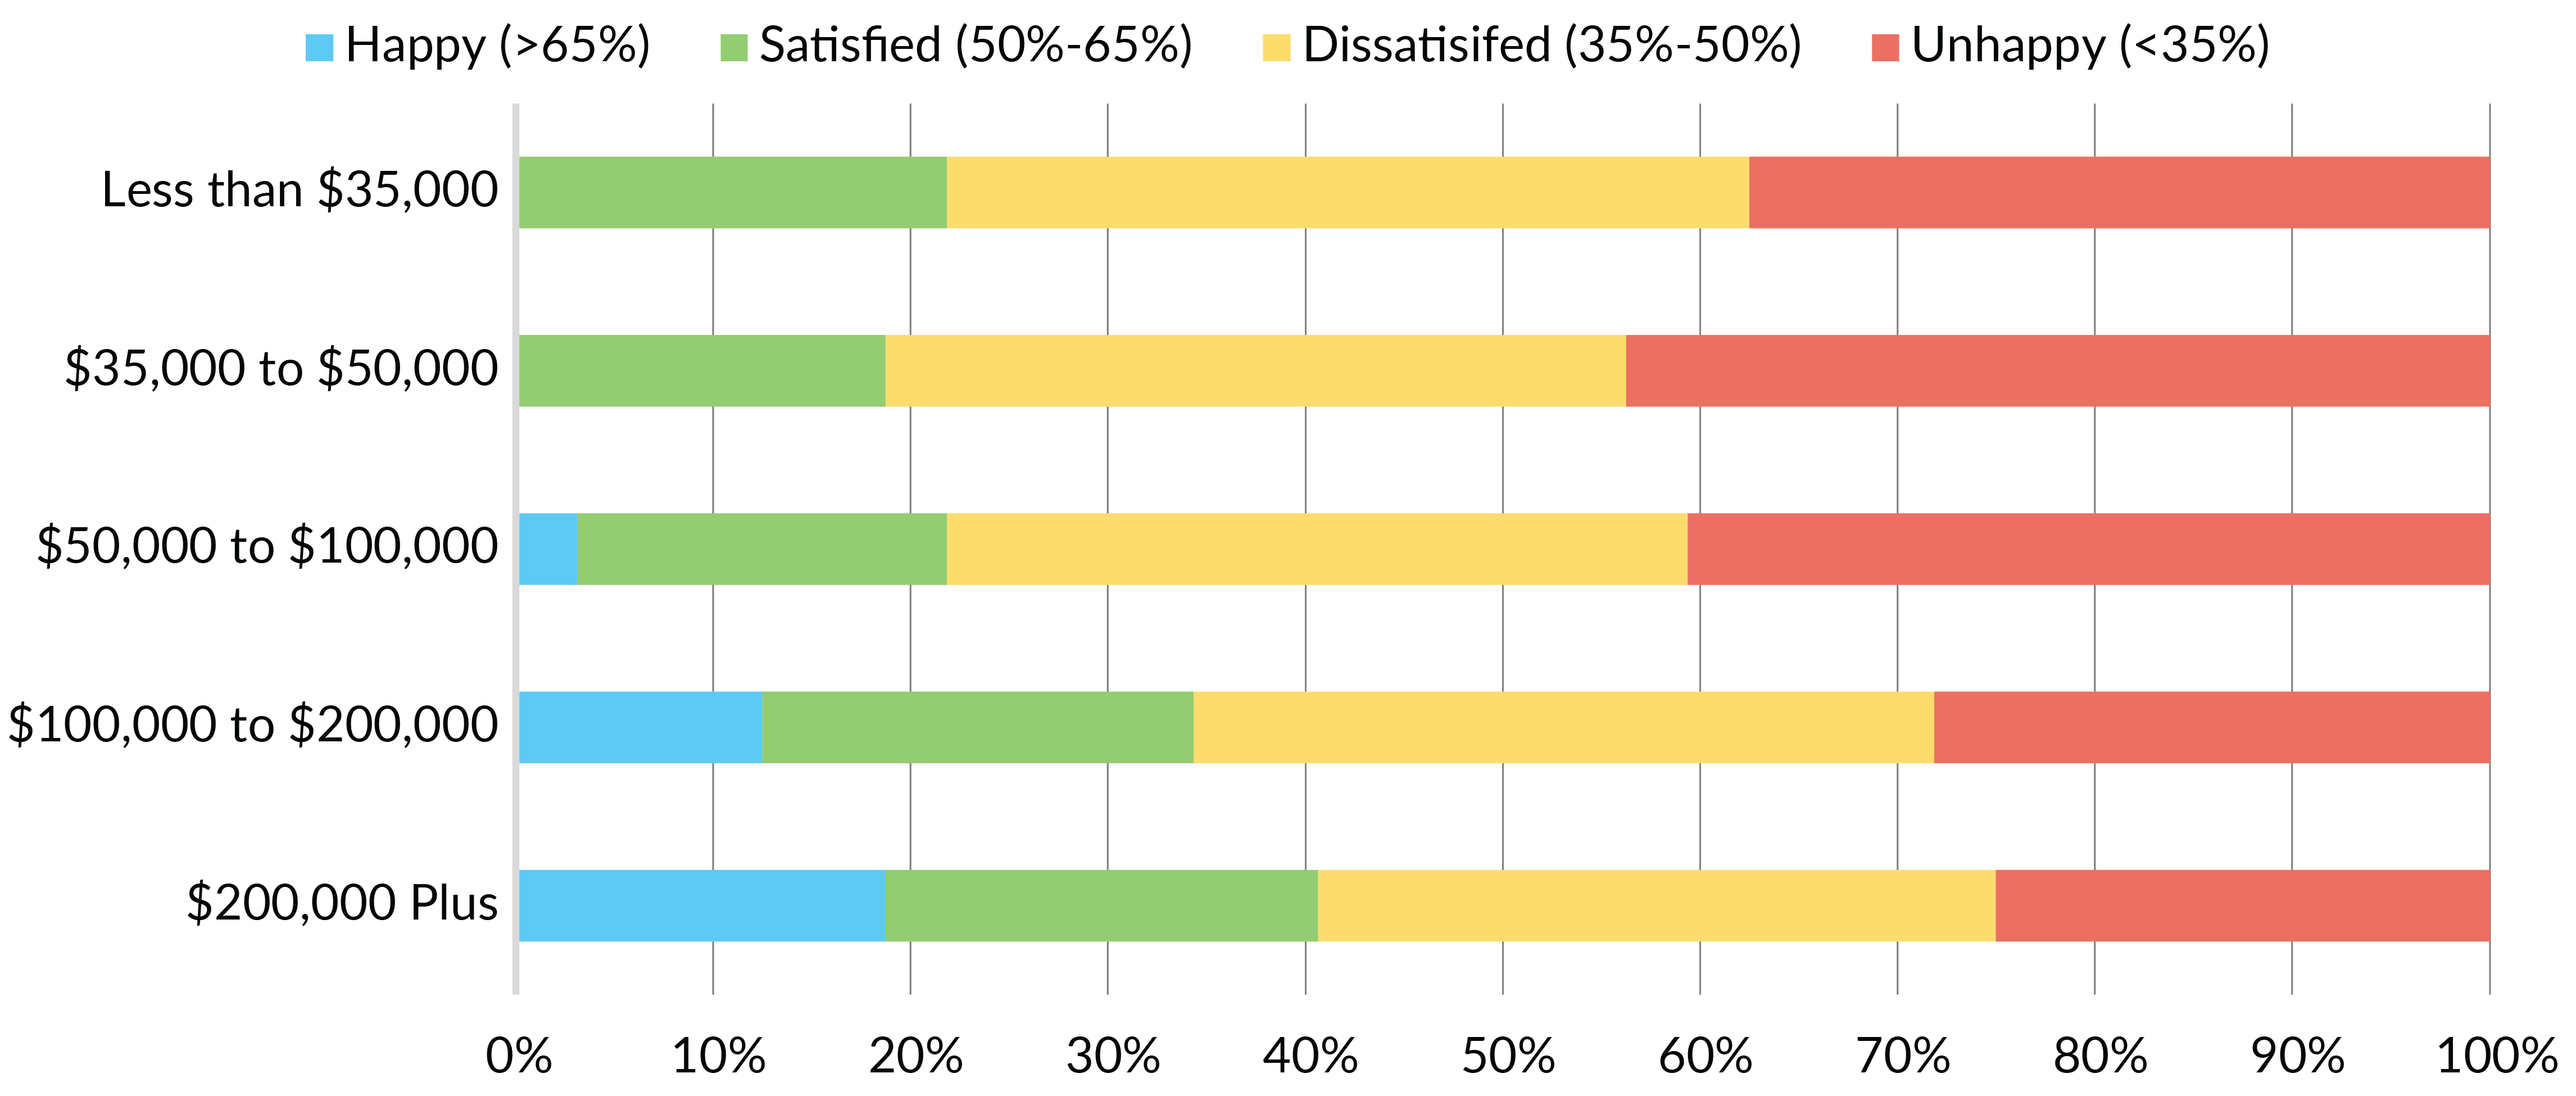 Figure 11: Satisfaction with Government Services by Income